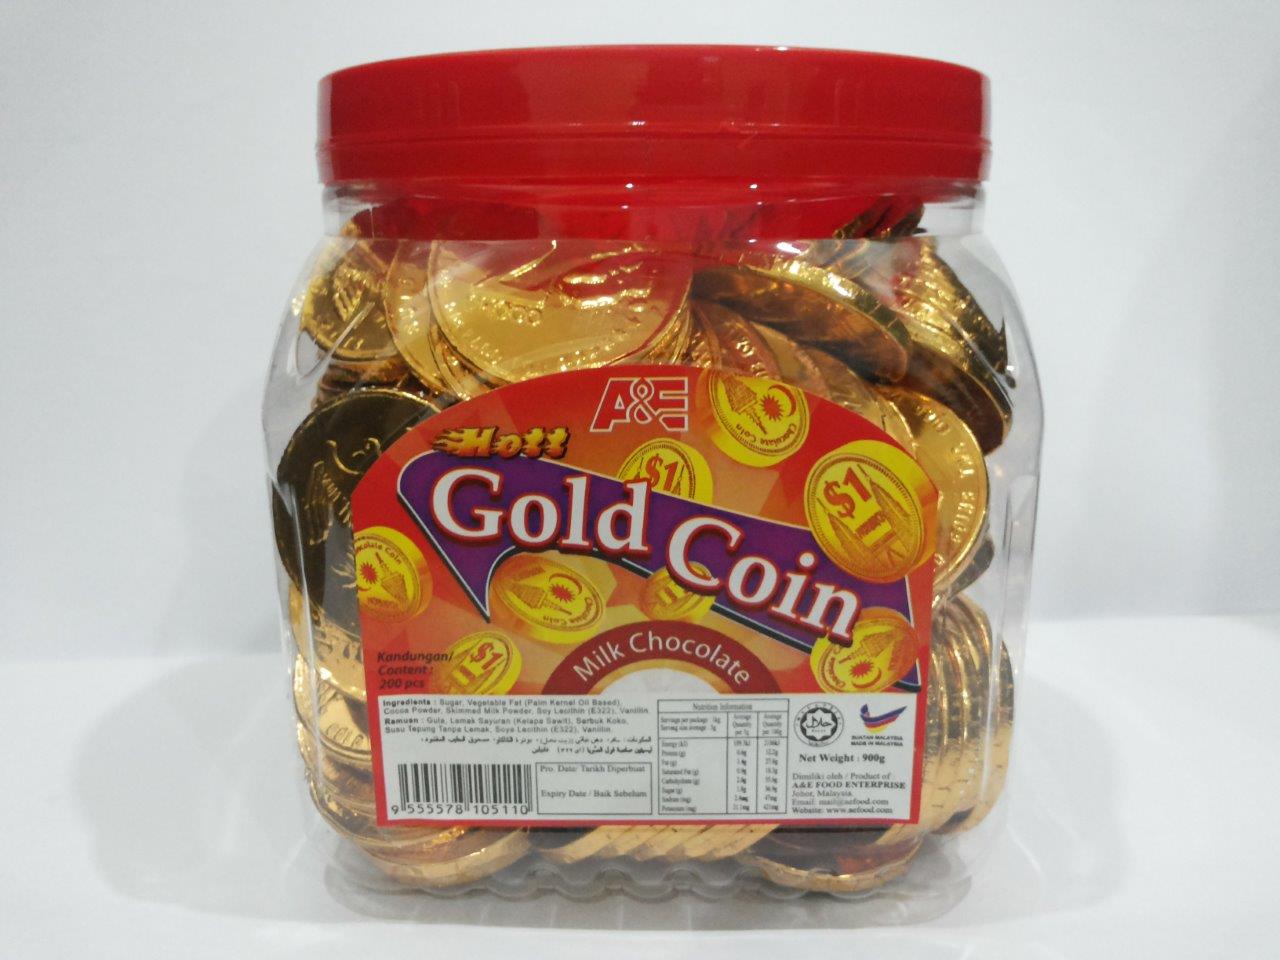 Gold Coin Chocolate